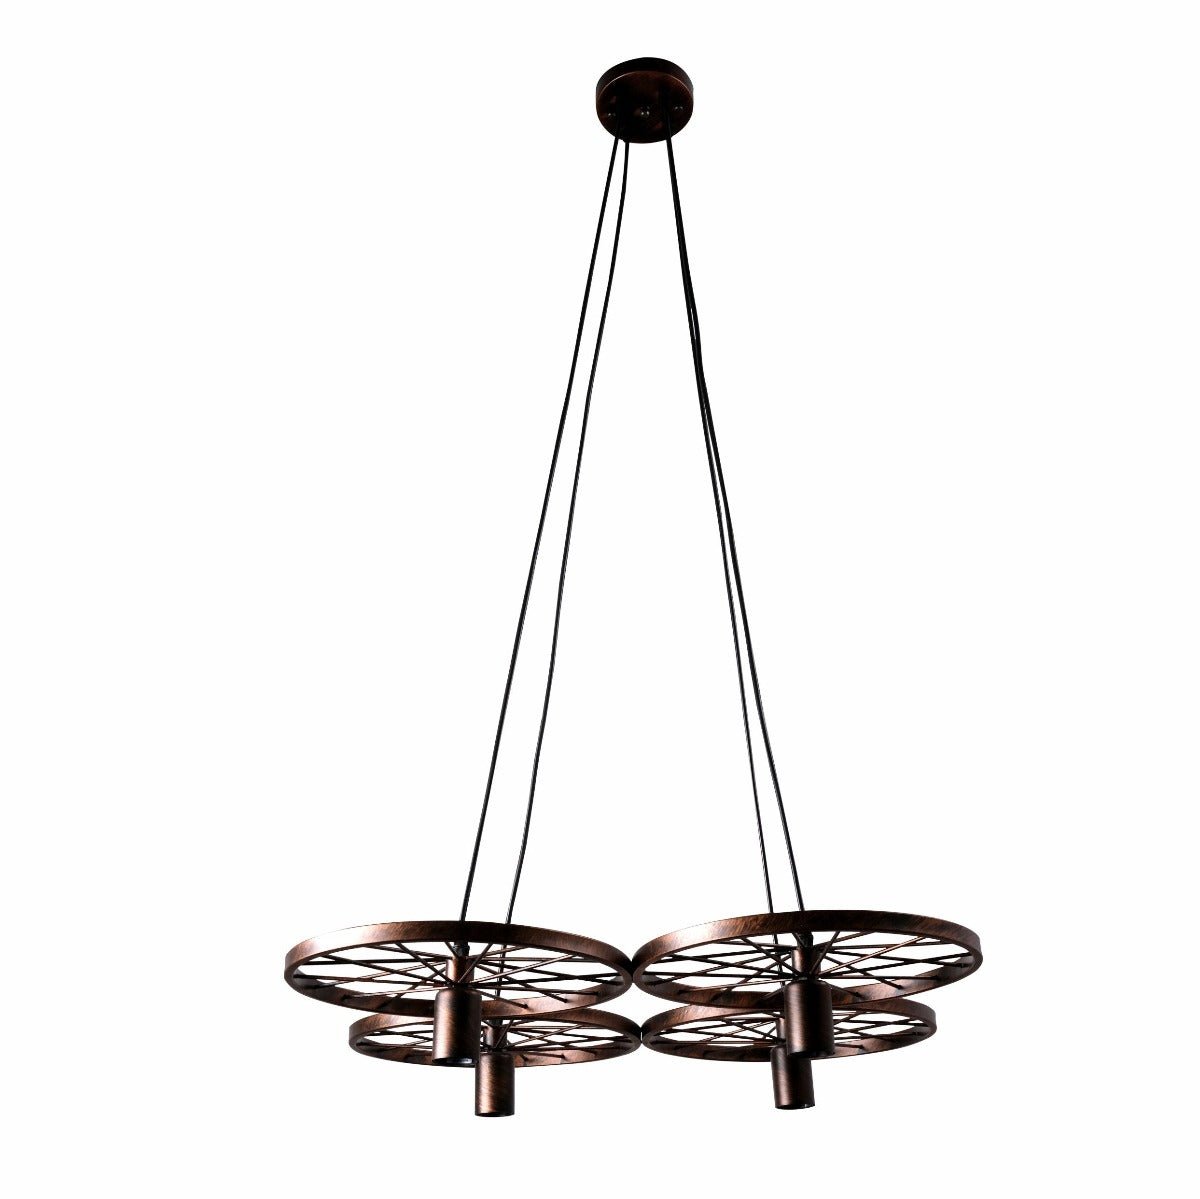 Main image of Vintage Industrial Wagon Wheel Pendant Light with 4xE27 Fitting | TEKLED 158-17894